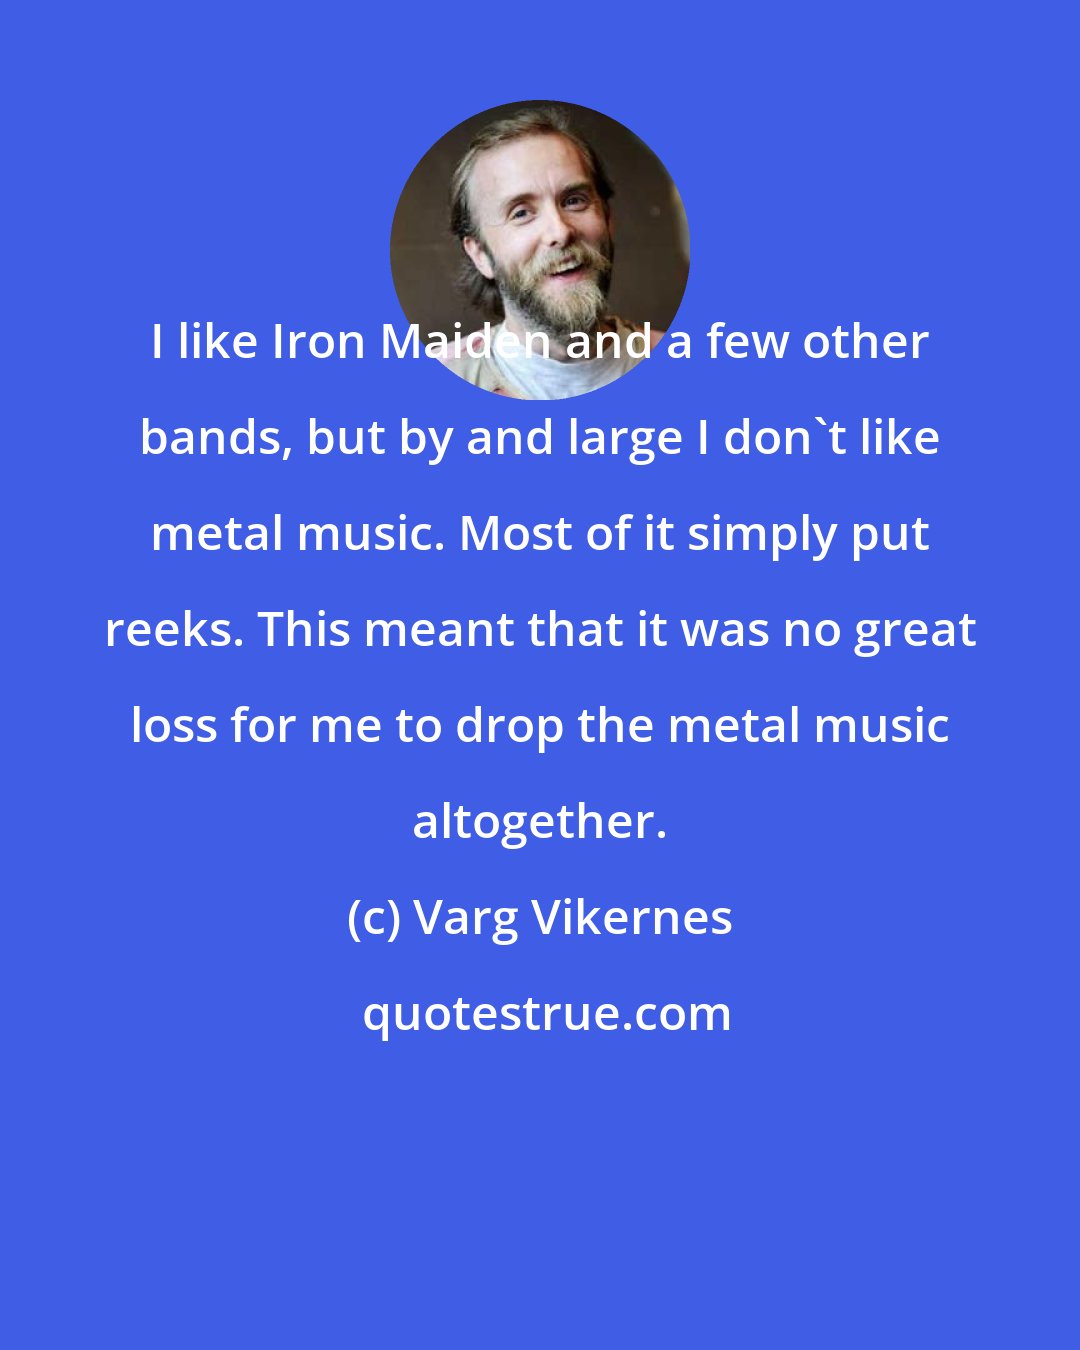 Varg Vikernes: I like Iron Maiden and a few other bands, but by and large I don't like metal music. Most of it simply put reeks. This meant that it was no great loss for me to drop the metal music altogether.